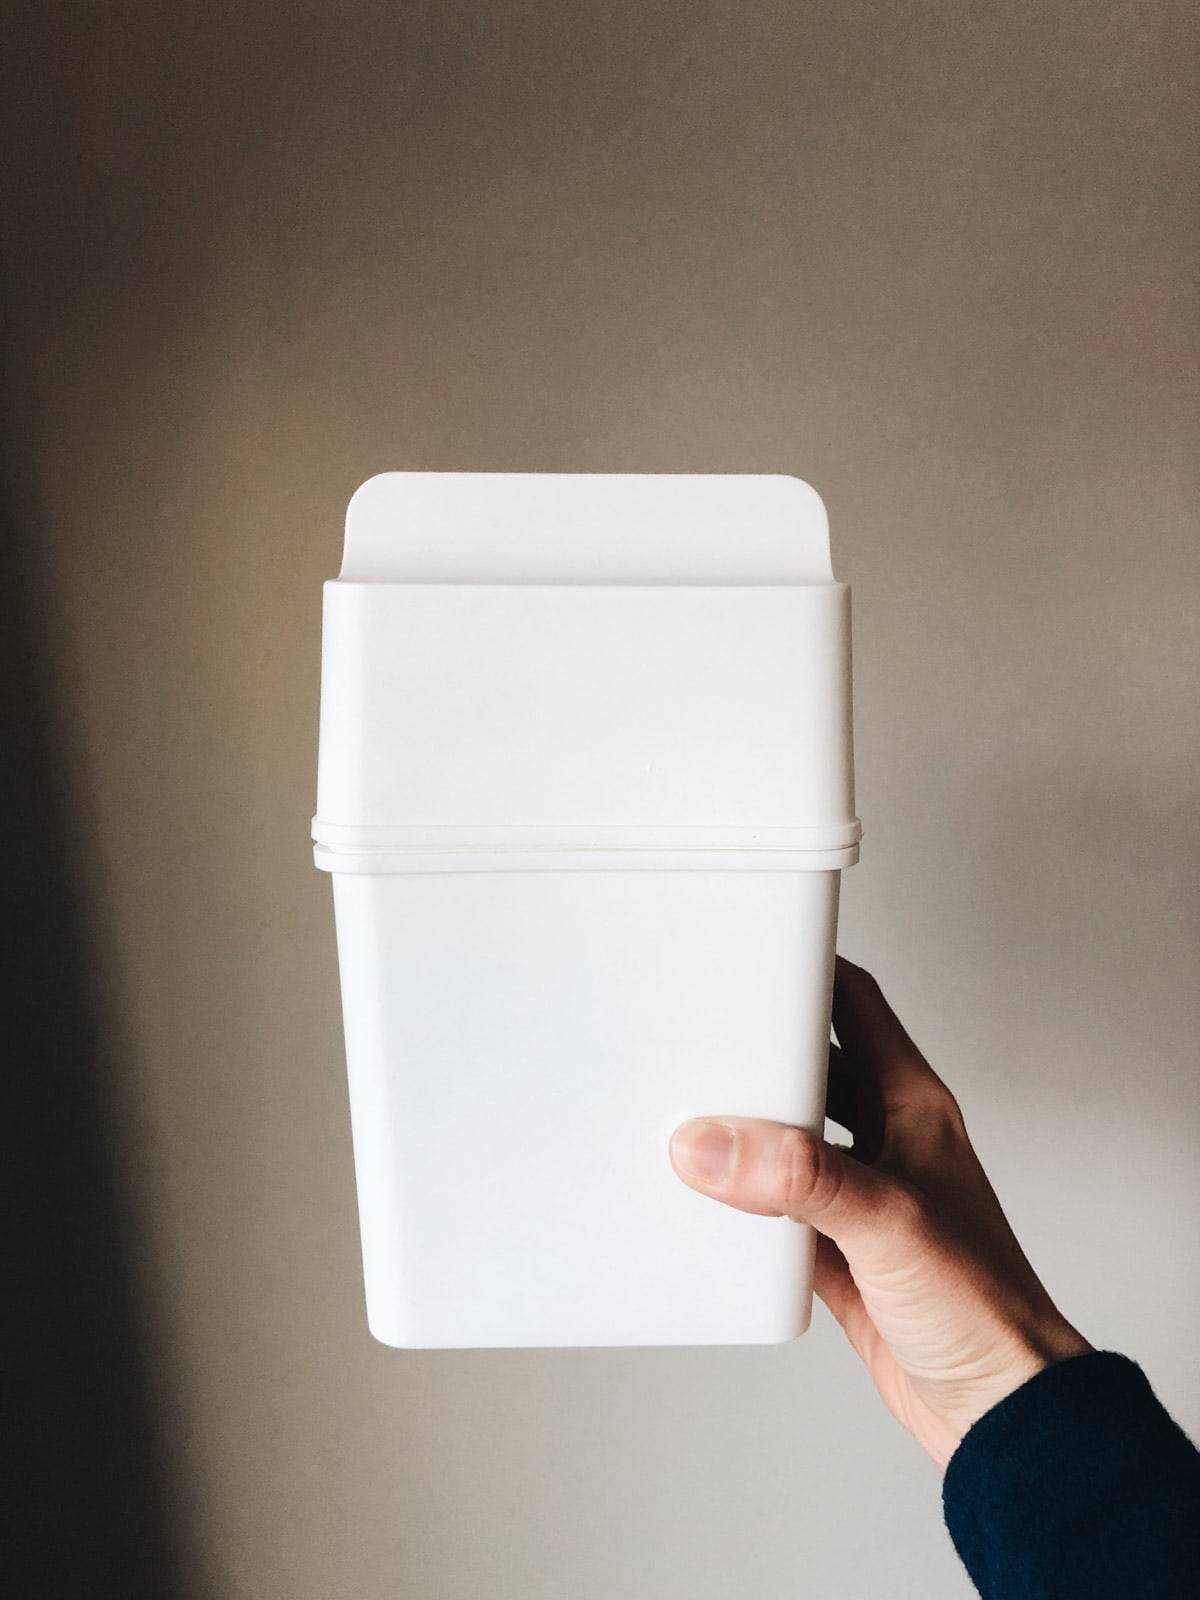 A person holding up a white container in their right hand.